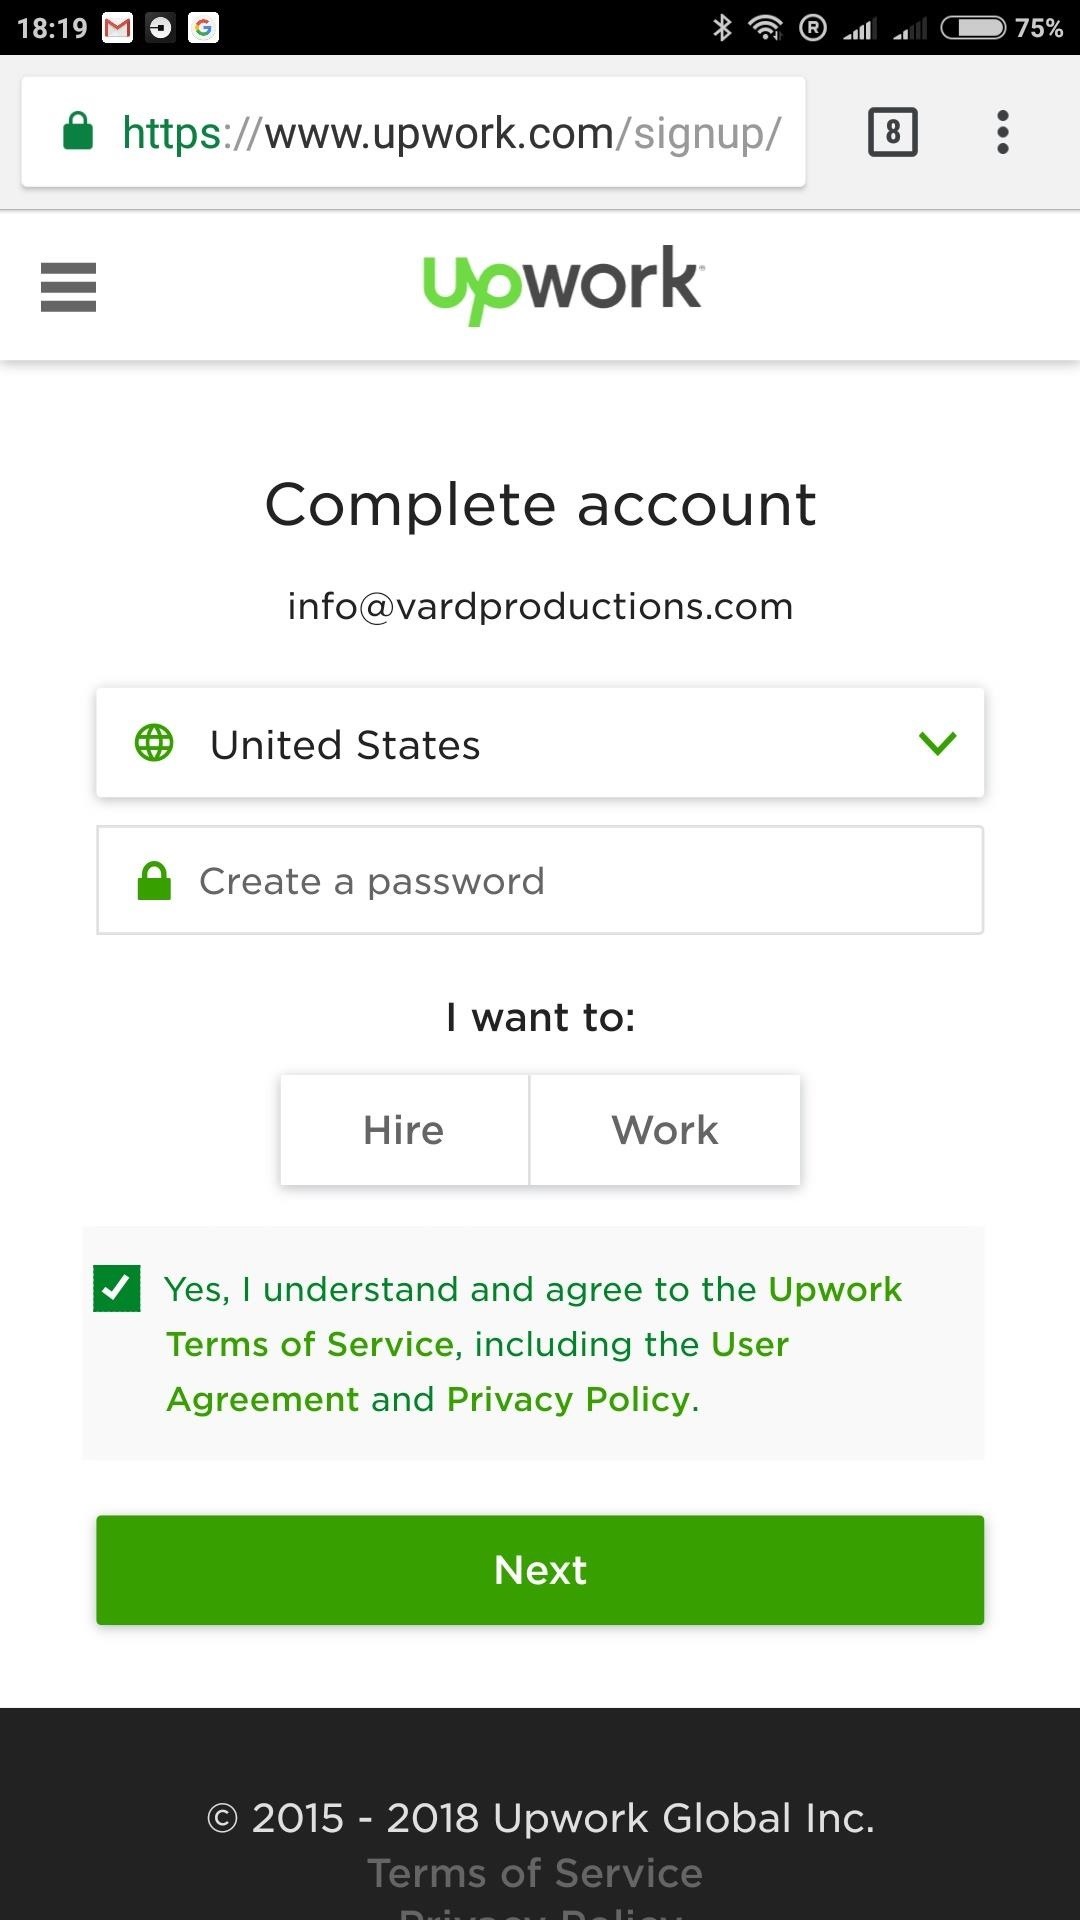 How to Start Your Own Remote Business & Make Money as a Freelancer with Upwork